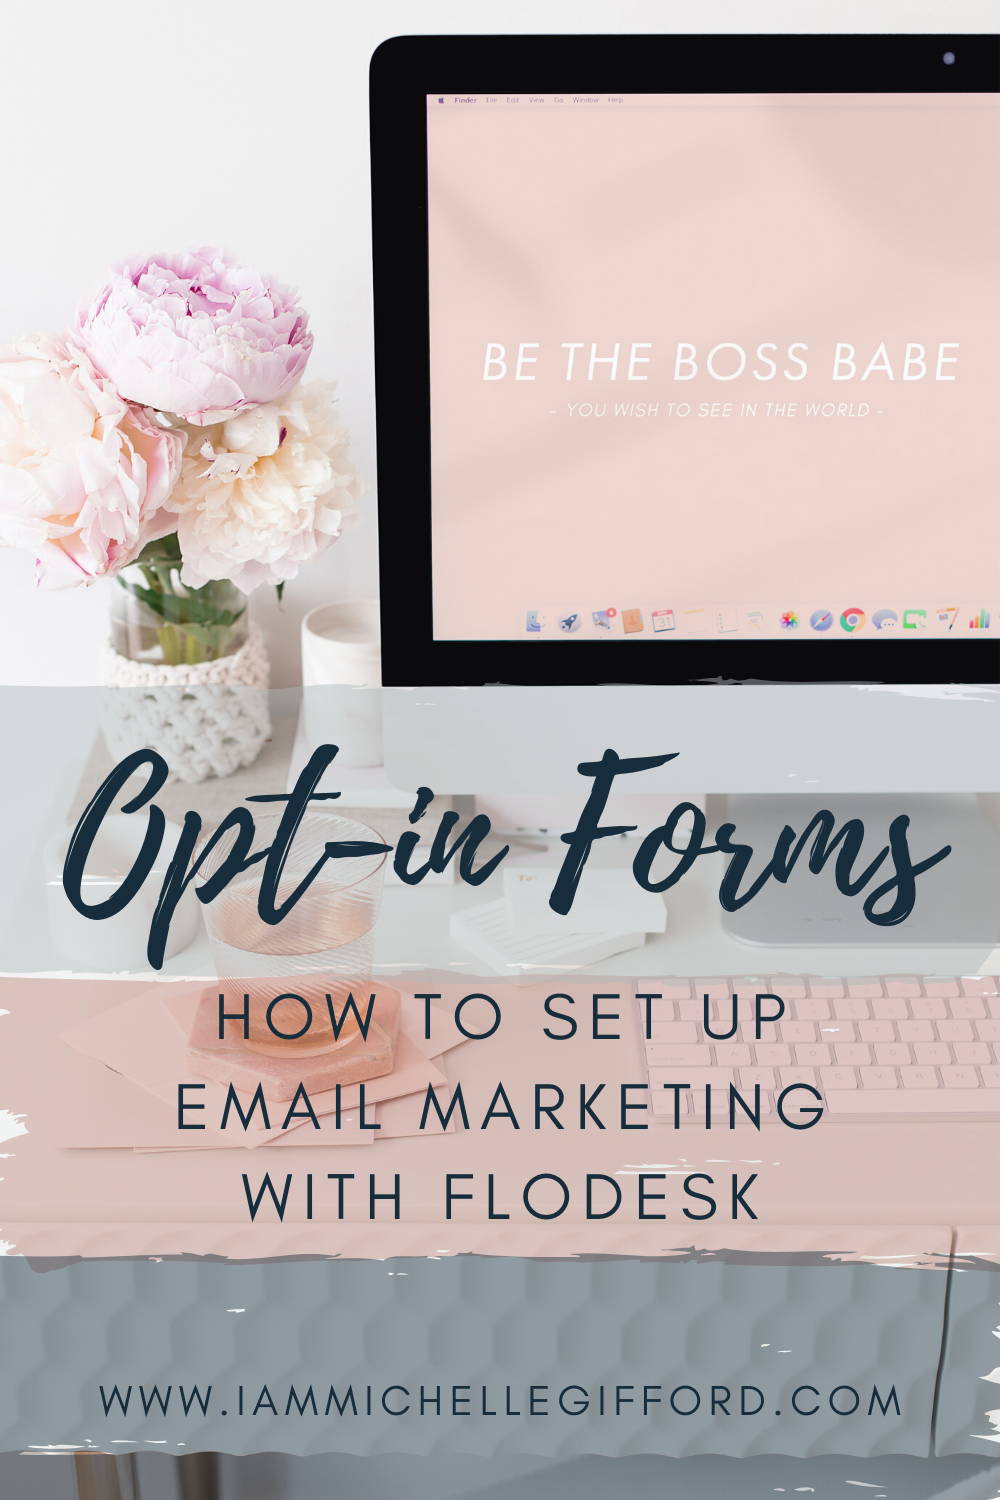 How to Create an Opt-in Form with Flodesk How to Set Up Email Marketing www.iammichellegifford.com